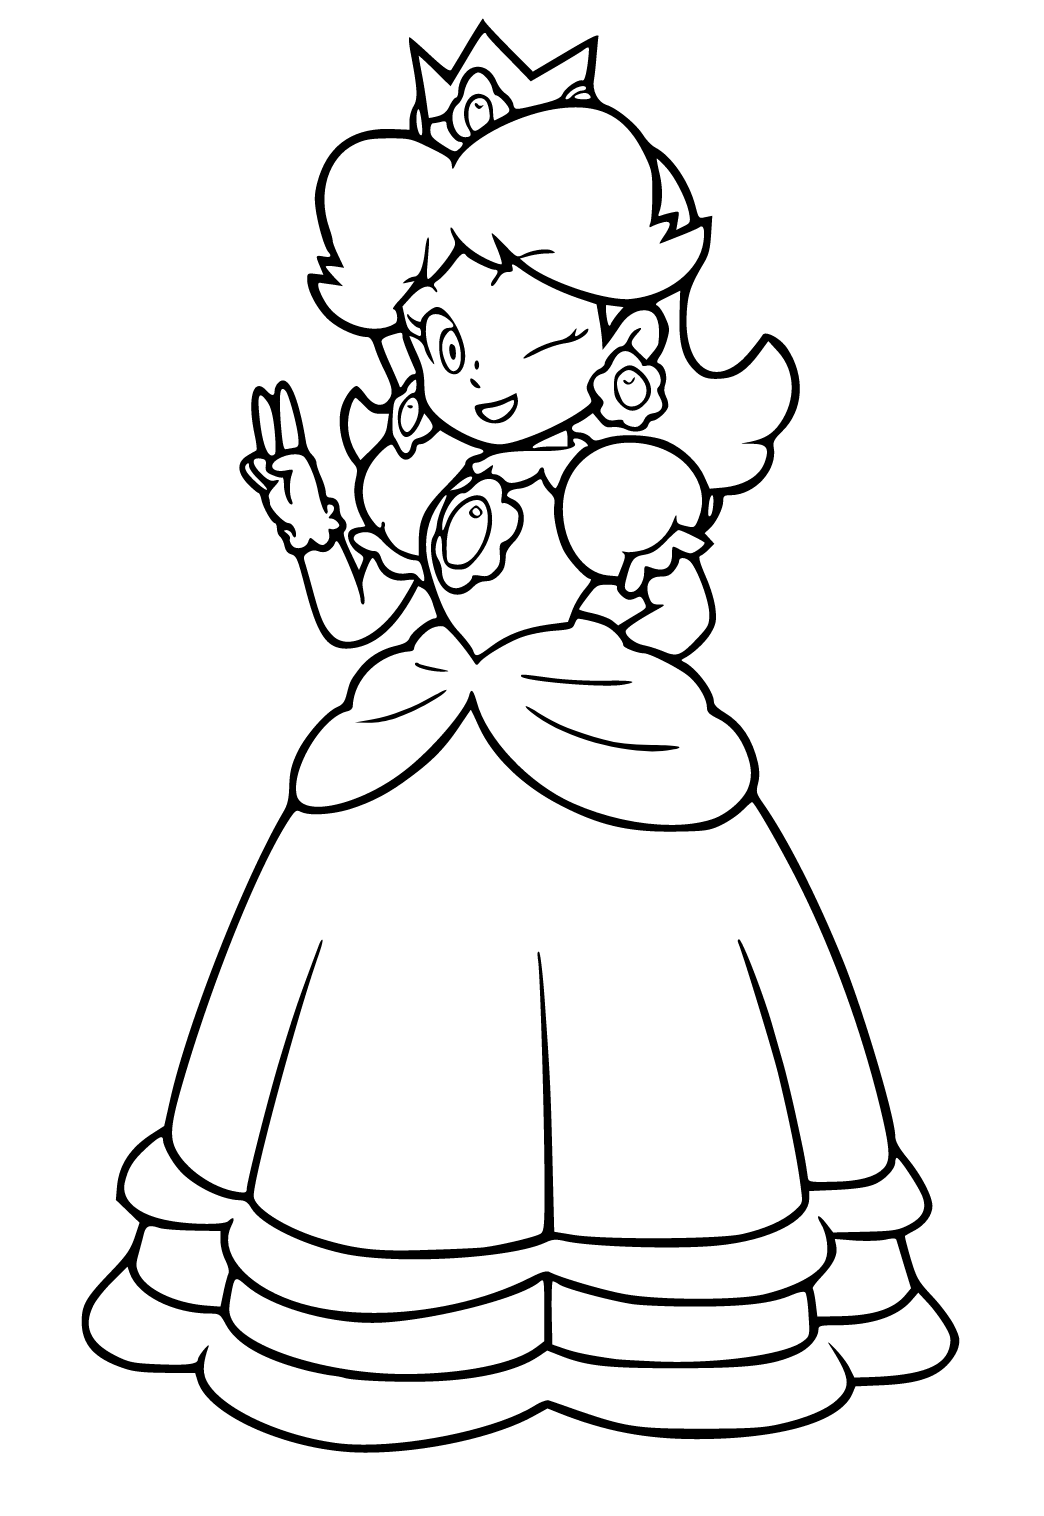 Free printable princess peach wink coloring page for adults and kids